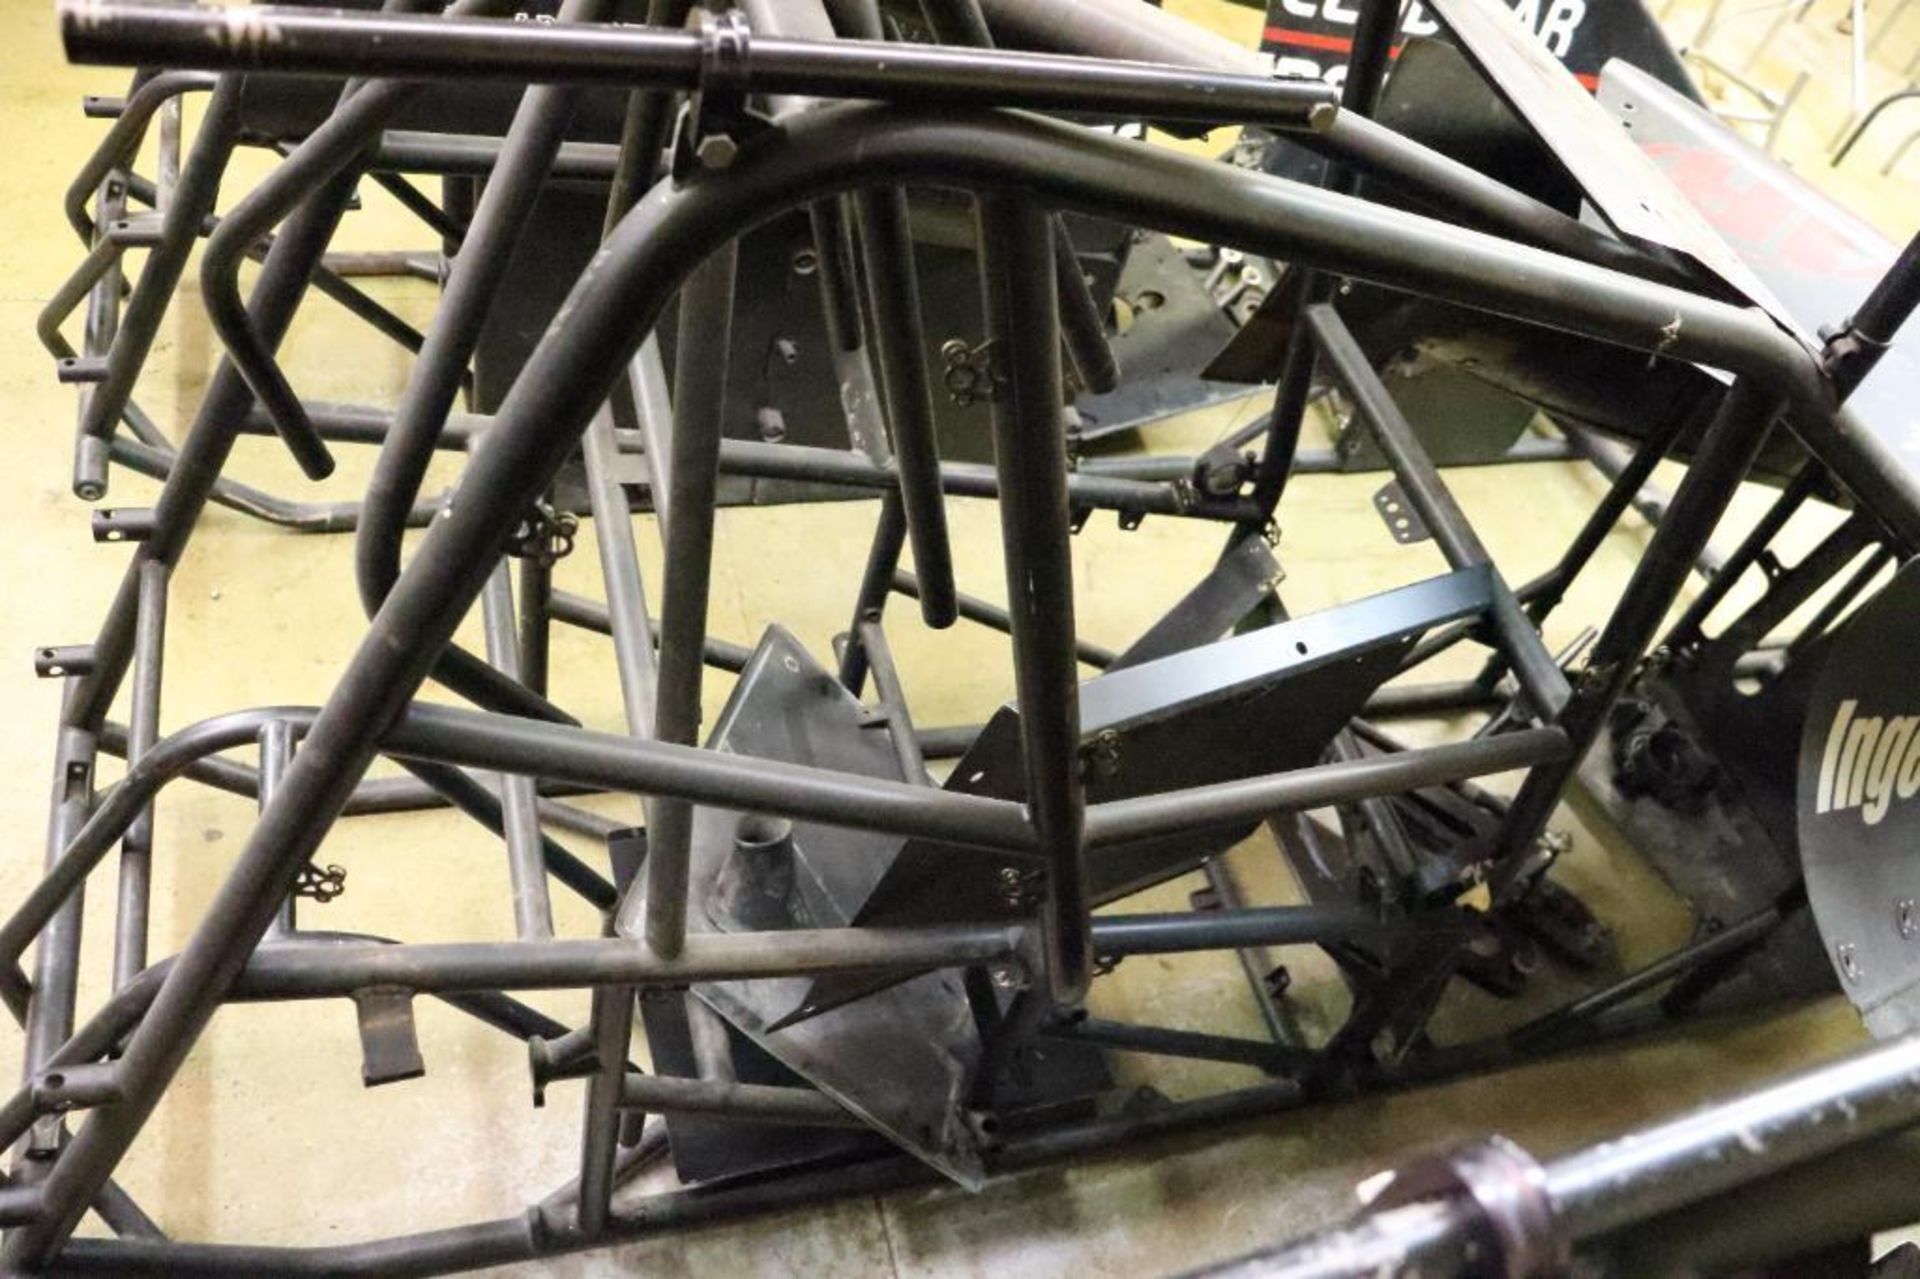 Smith Ingersoll-Rand sprint car w/ body panels & components - Image 17 of 27